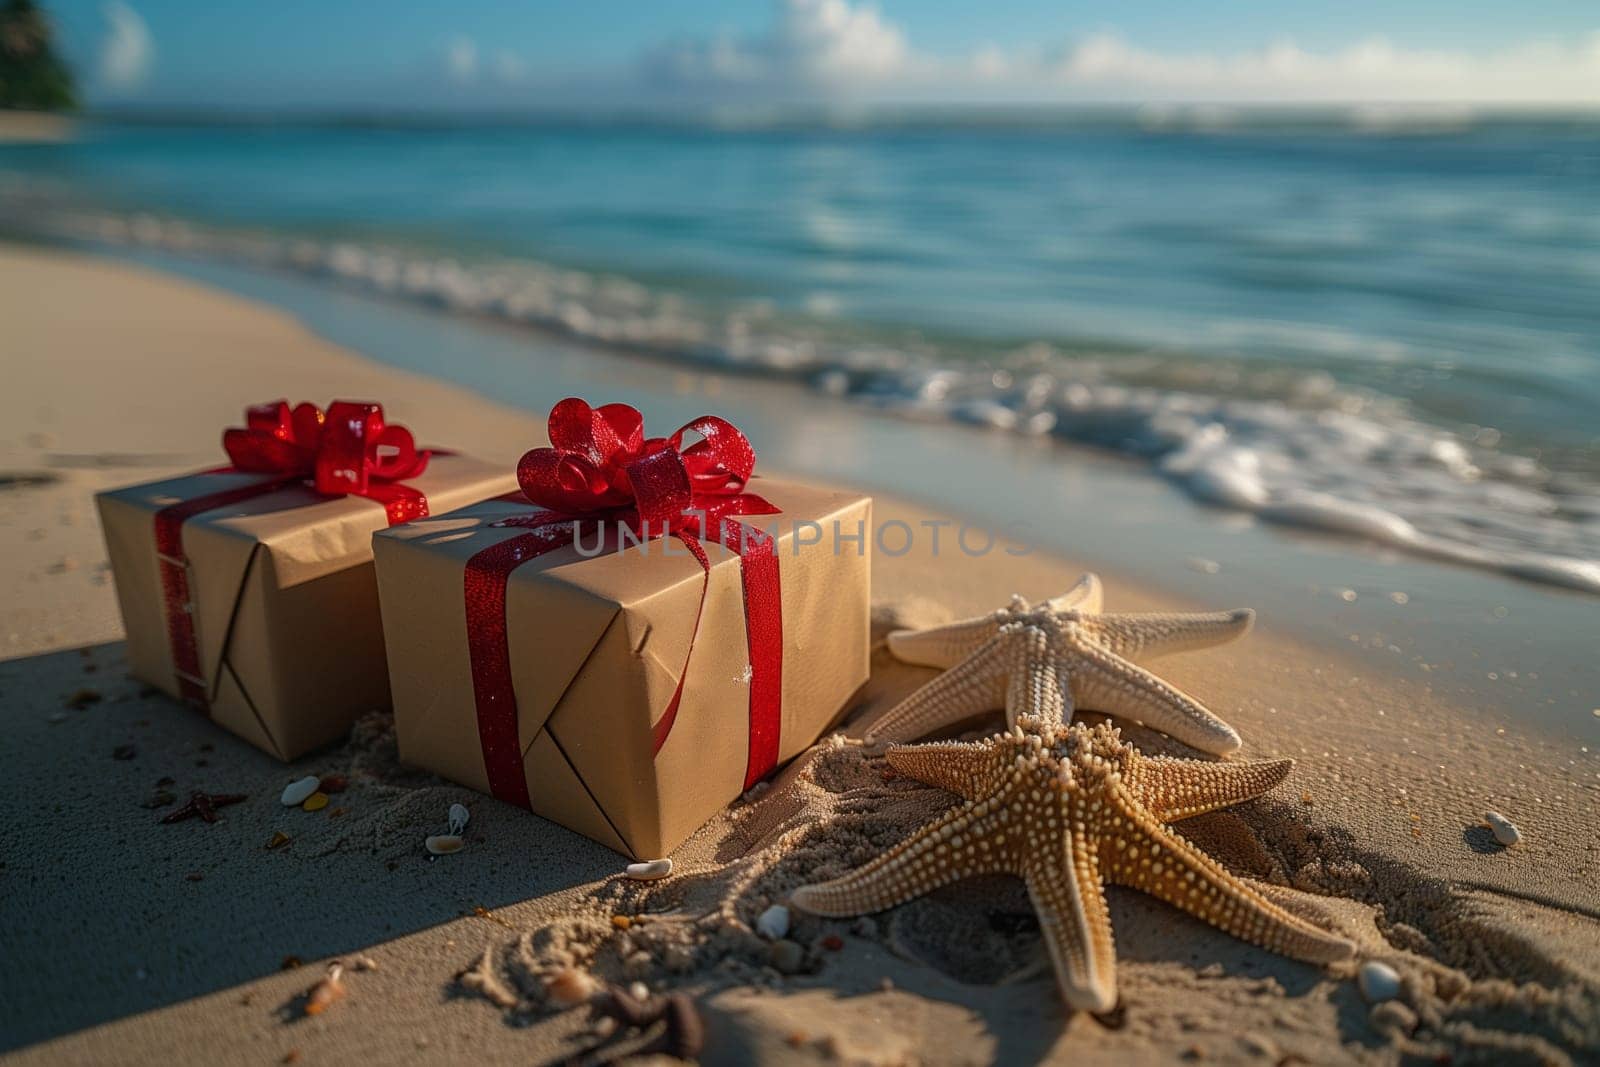 Gifts and starfish on beach under clear sky and gentle breeze by richwolf